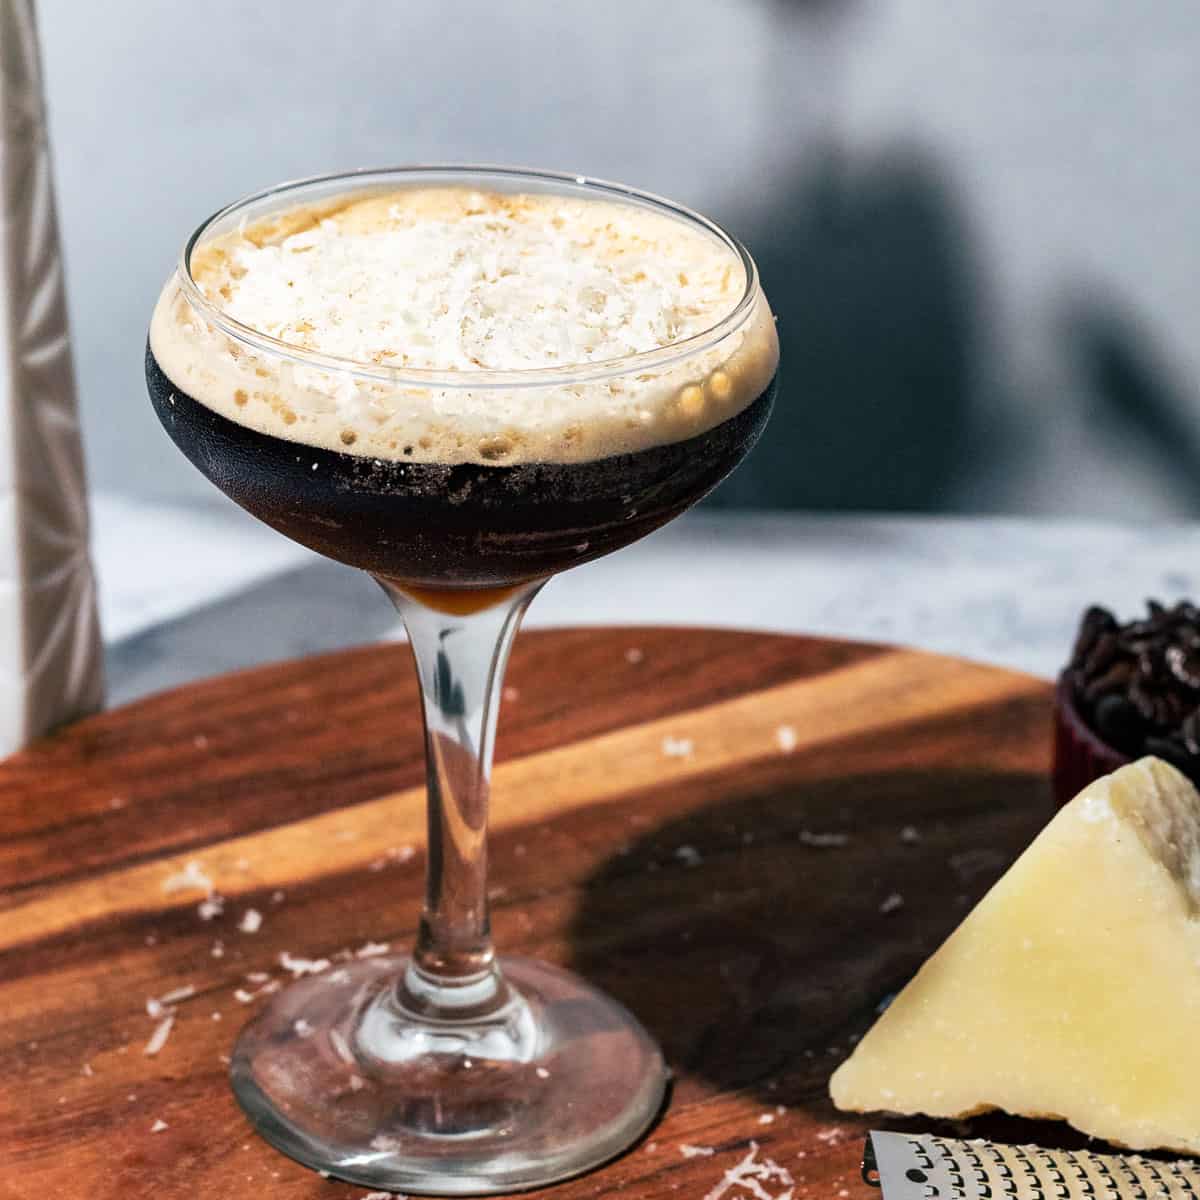 Espresso martini topped with shredded cheese and a block of parmesan with a grater on the side.